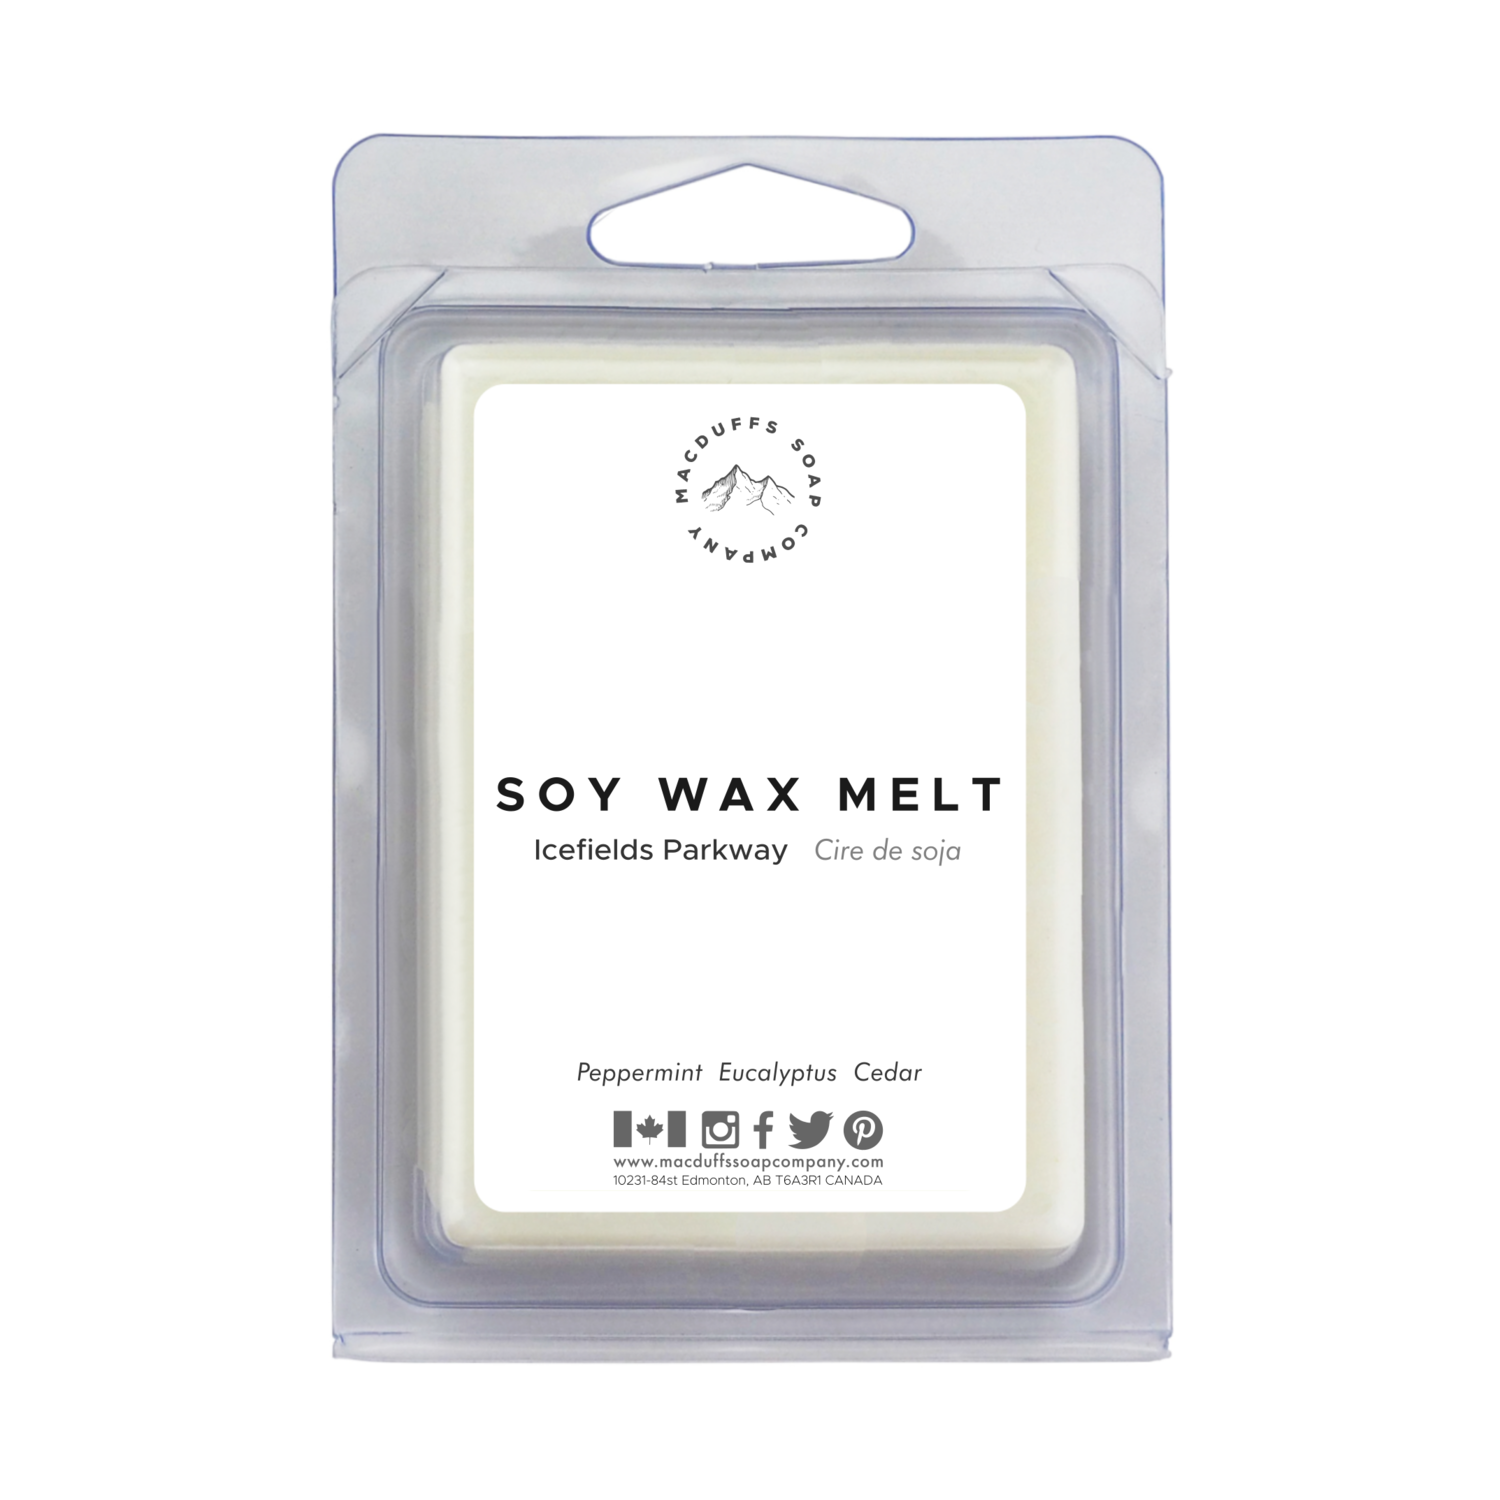 Icefields Parkway Soy Wax Melt